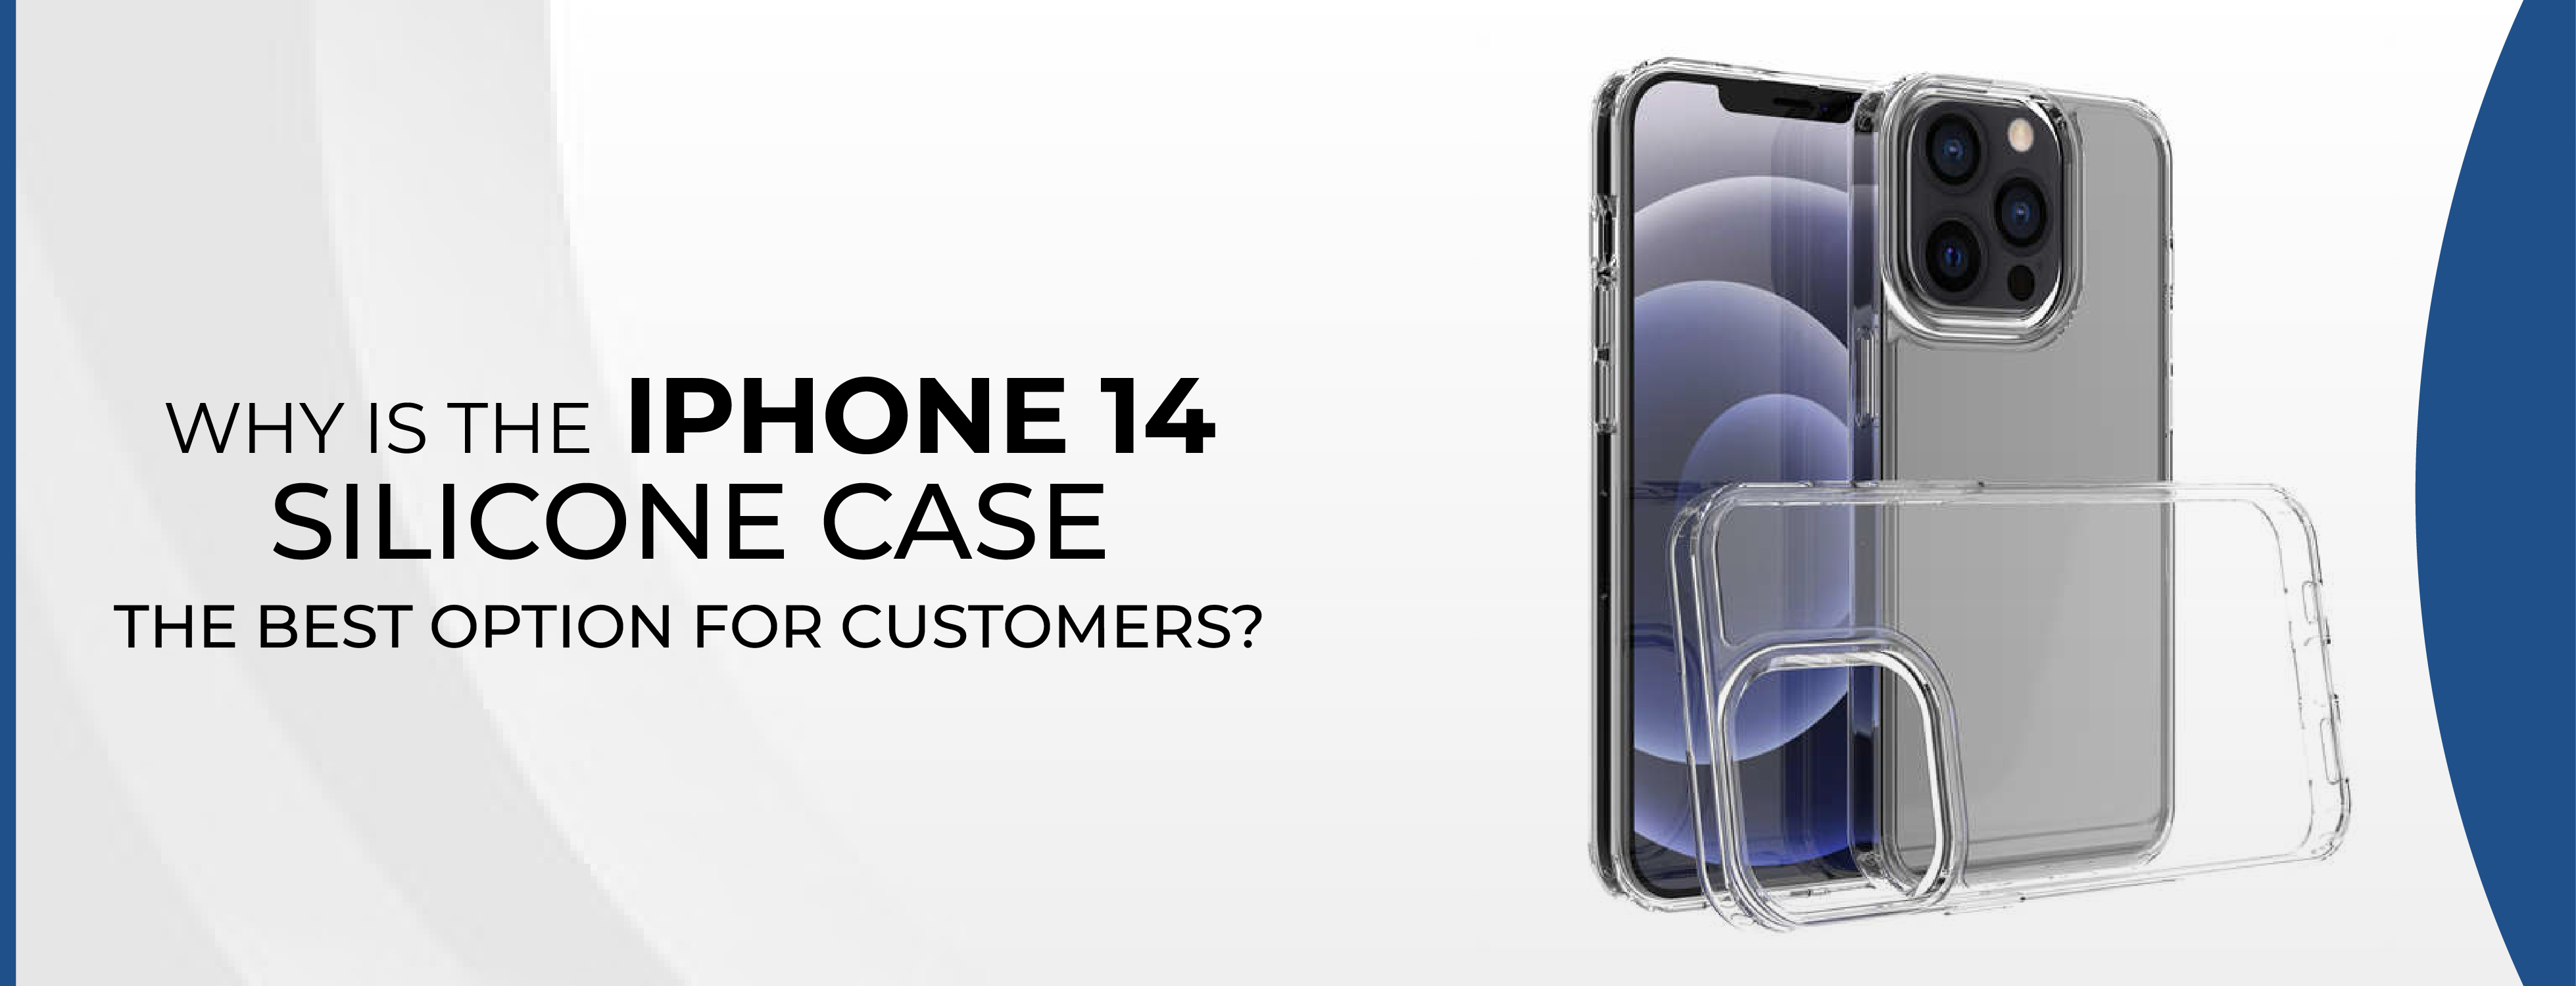 Why is the iPhone 14 silicone case the best option for customers